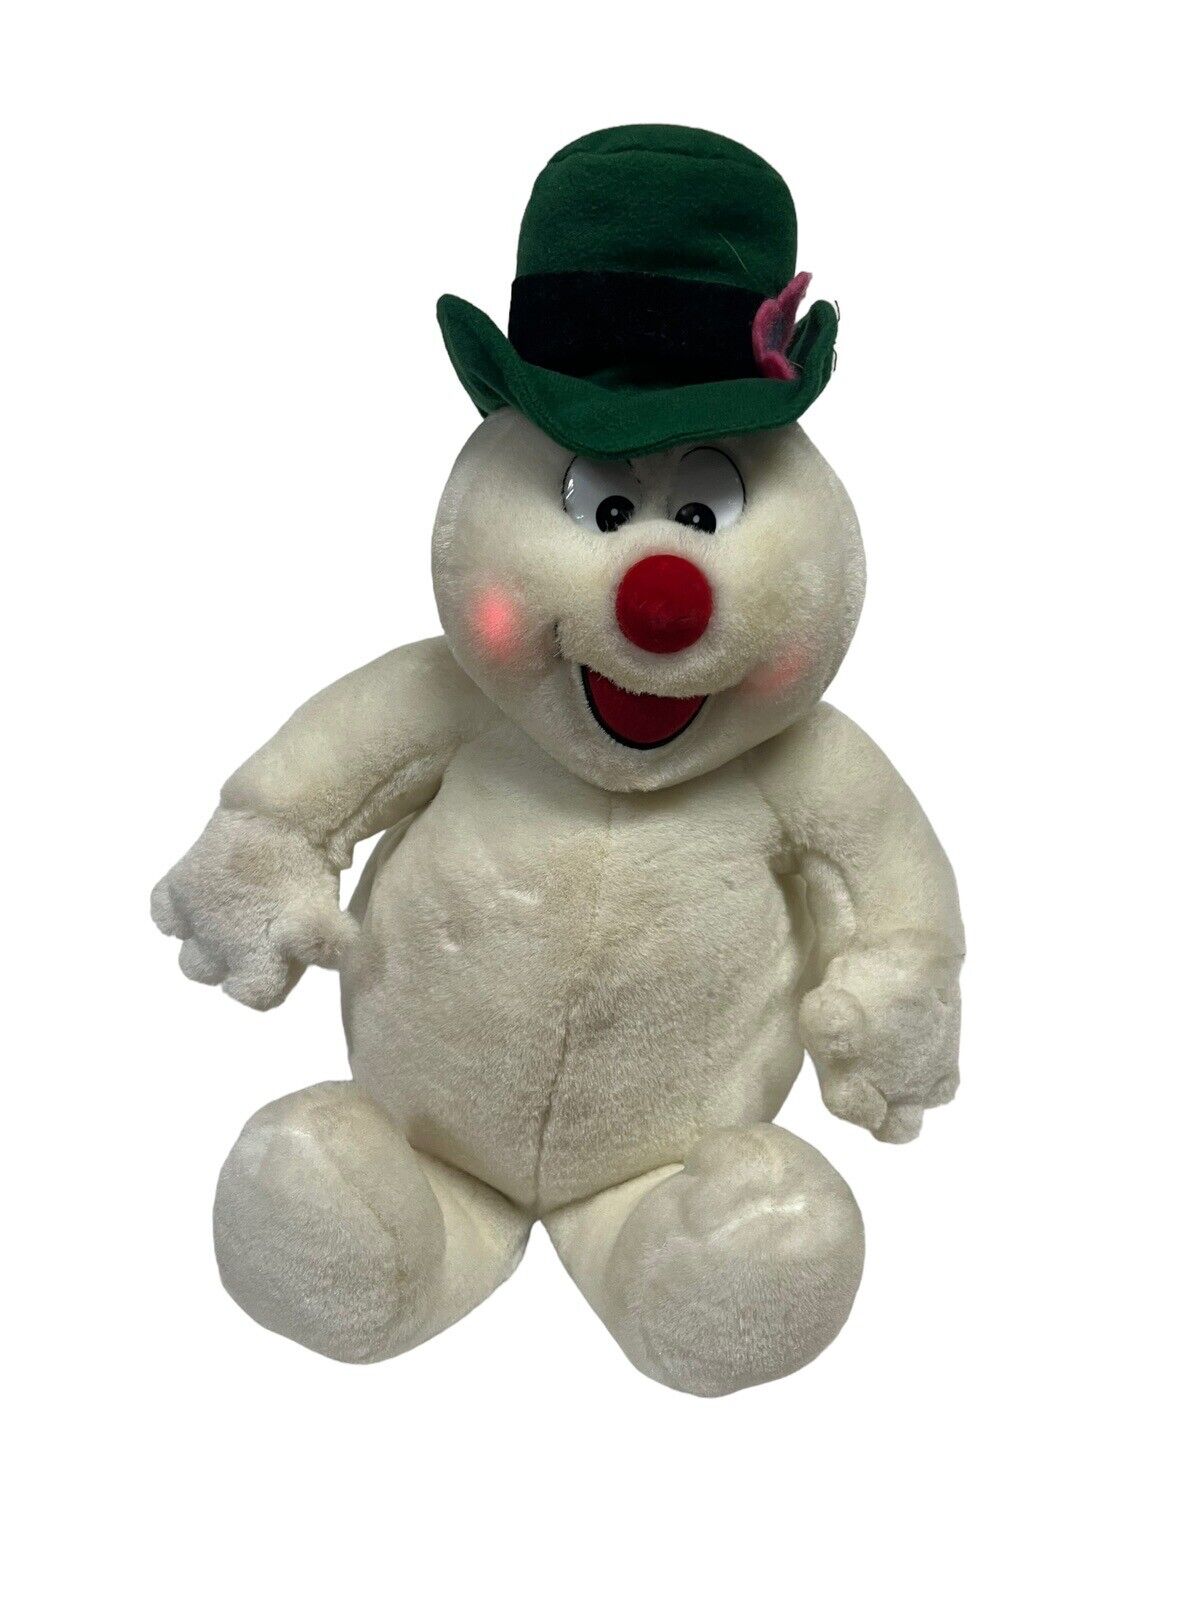 Vintage Gemmy Singing Frosty the Snowman Musical Plush Toy 1999 12” Working